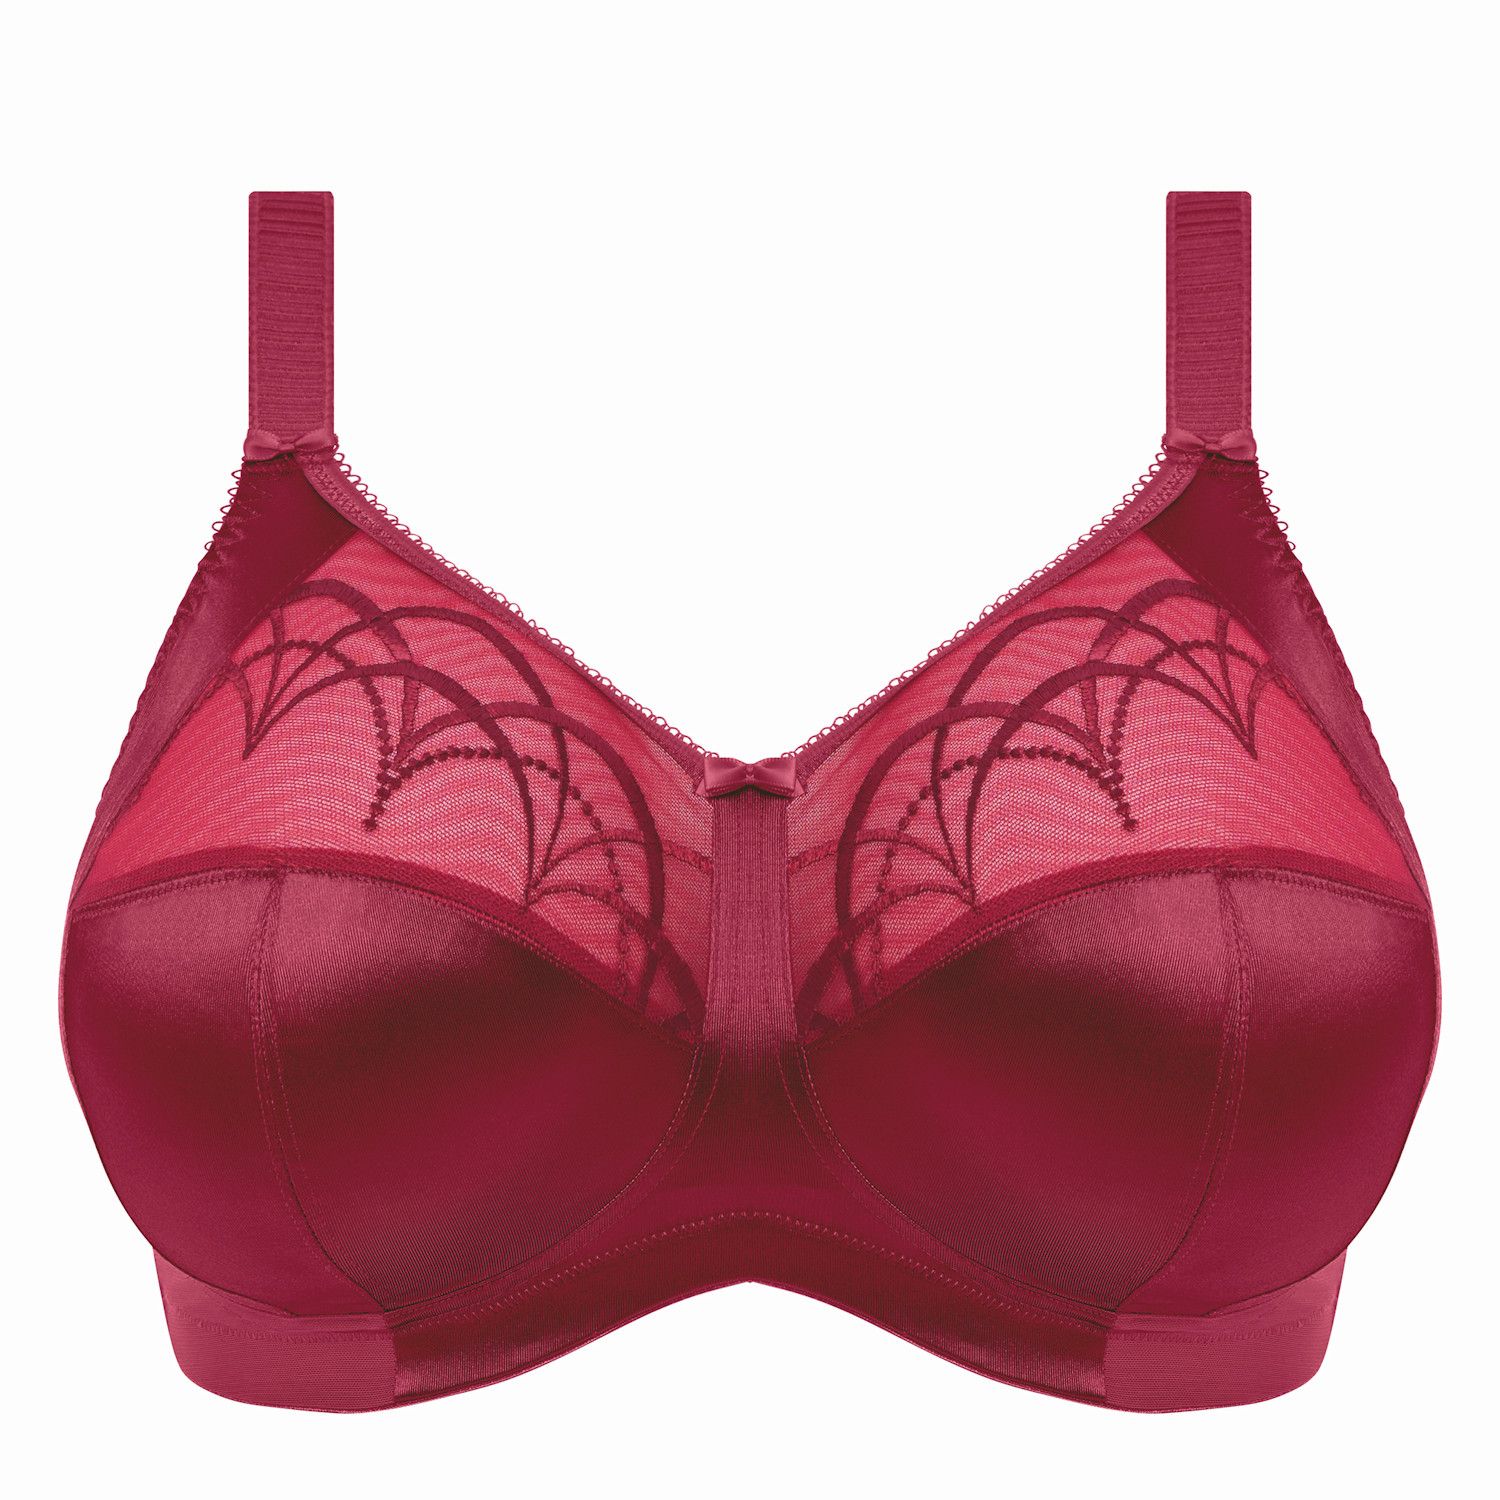 Elomi Full Figure Cate Soft Cup No Wire Bra EL4033, Online Only - Macy's